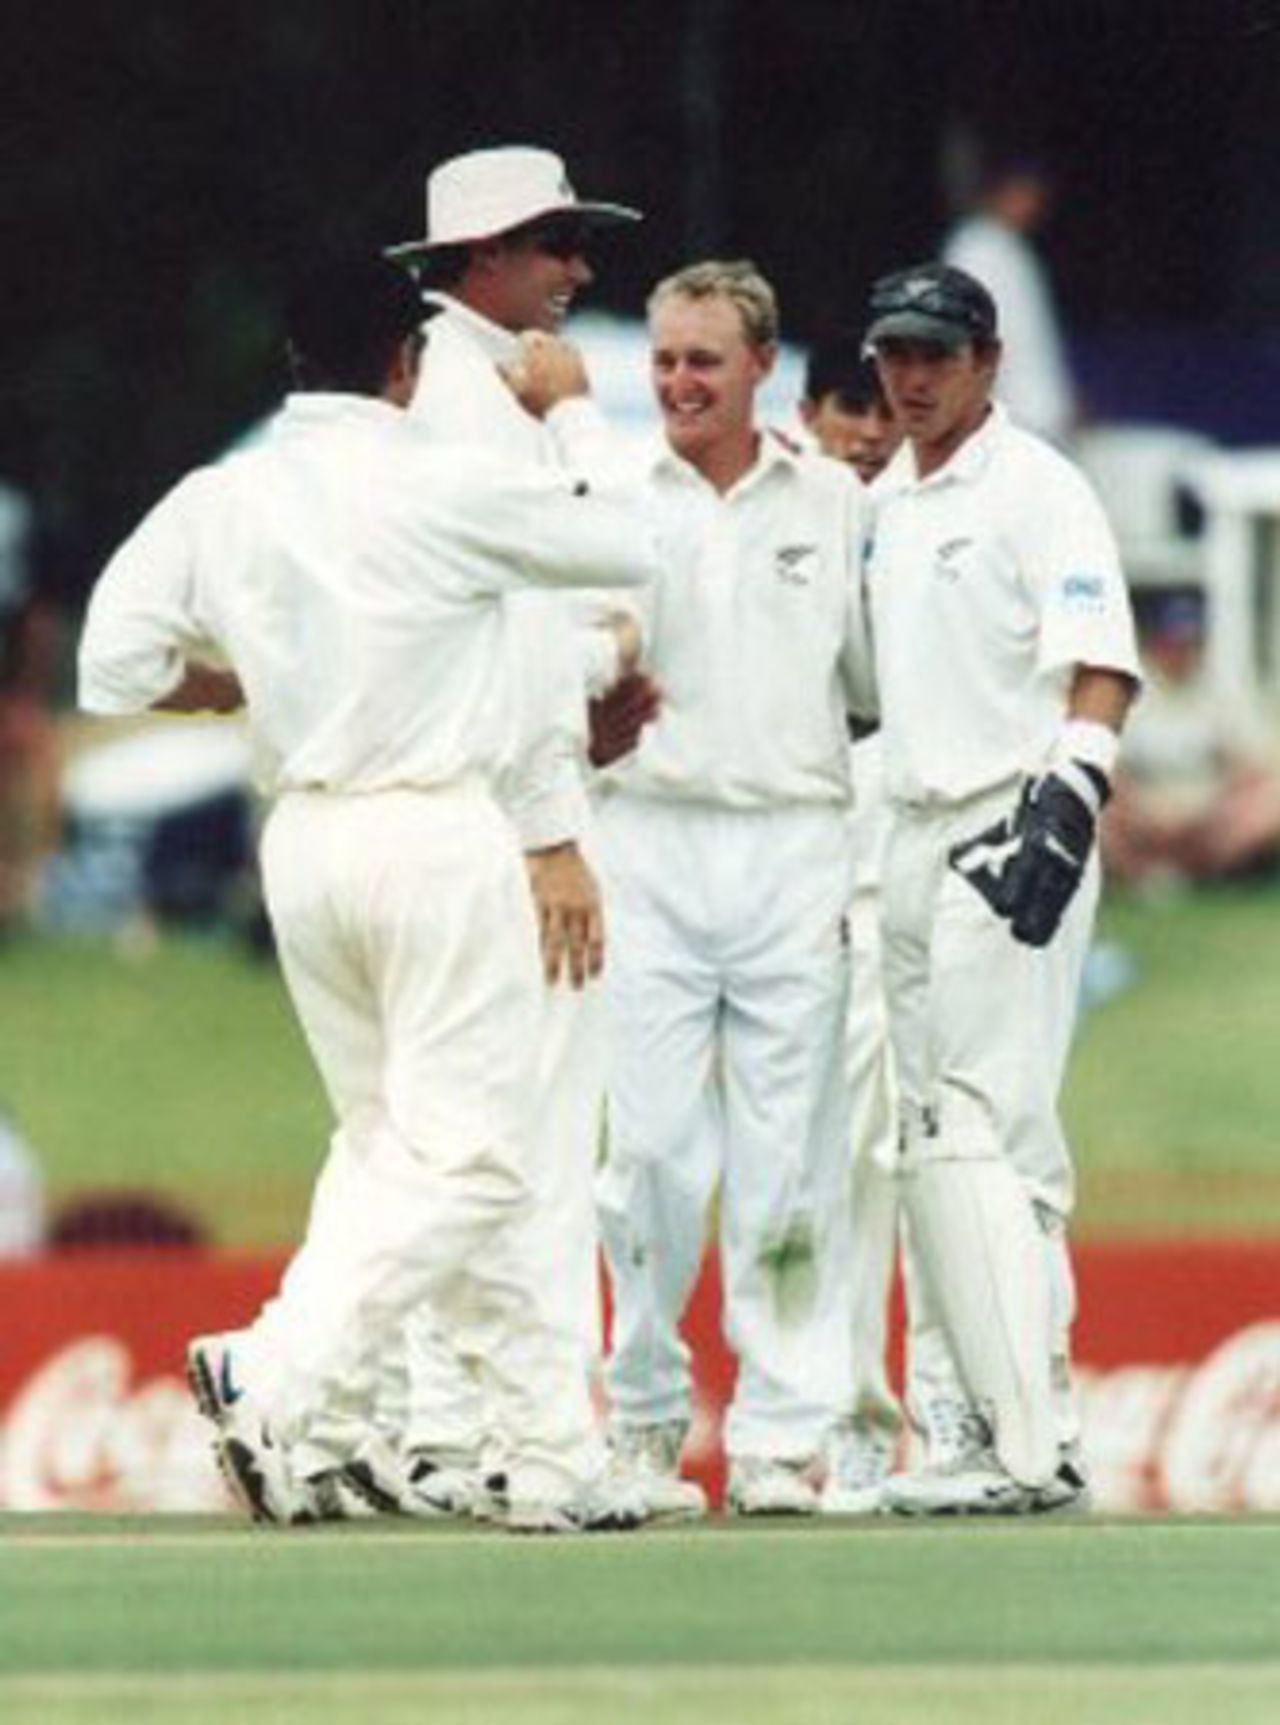 In the 1st Test between South Africa and New Zealand Nov 2000